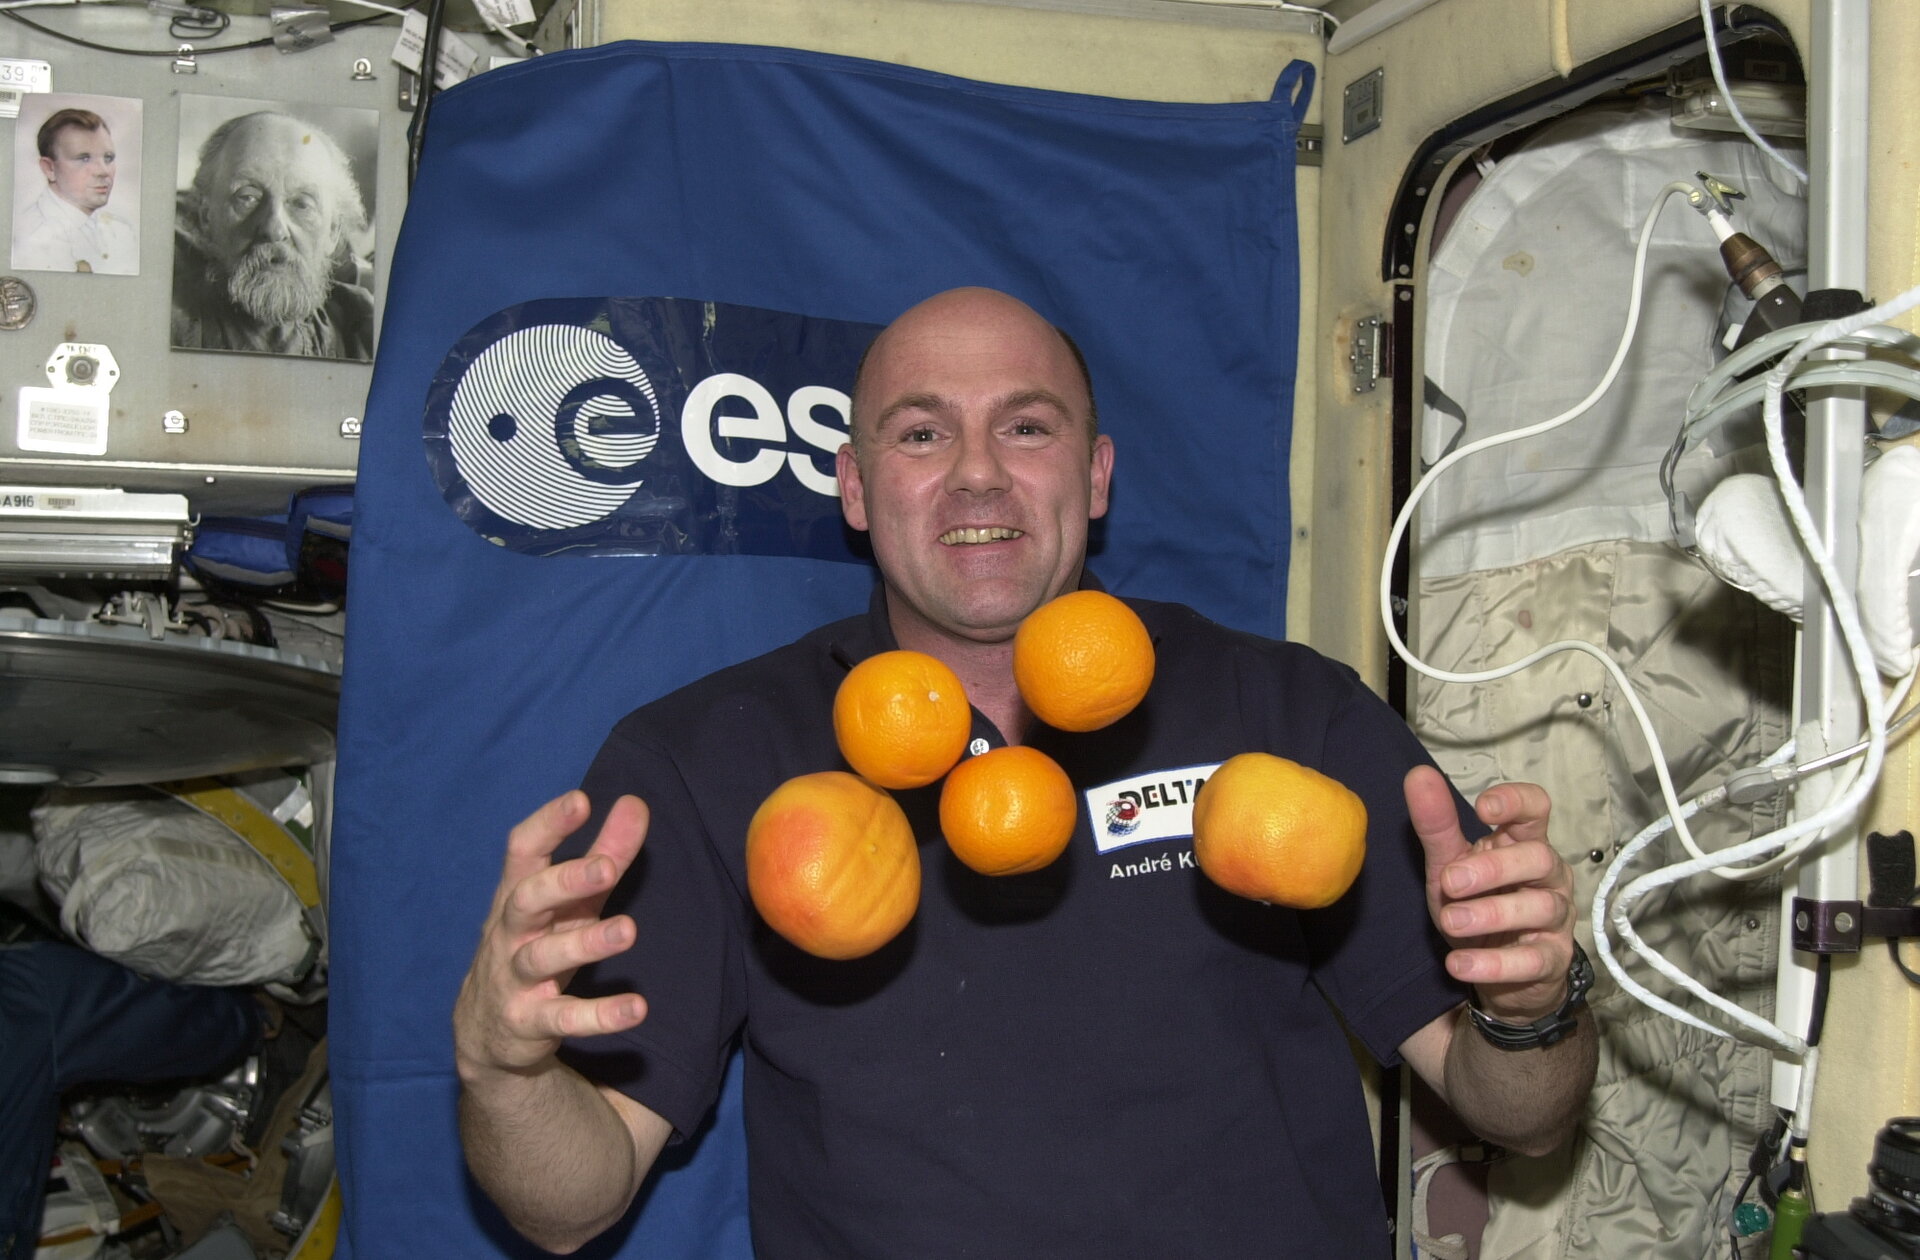 Space food - new opportunities for food industry